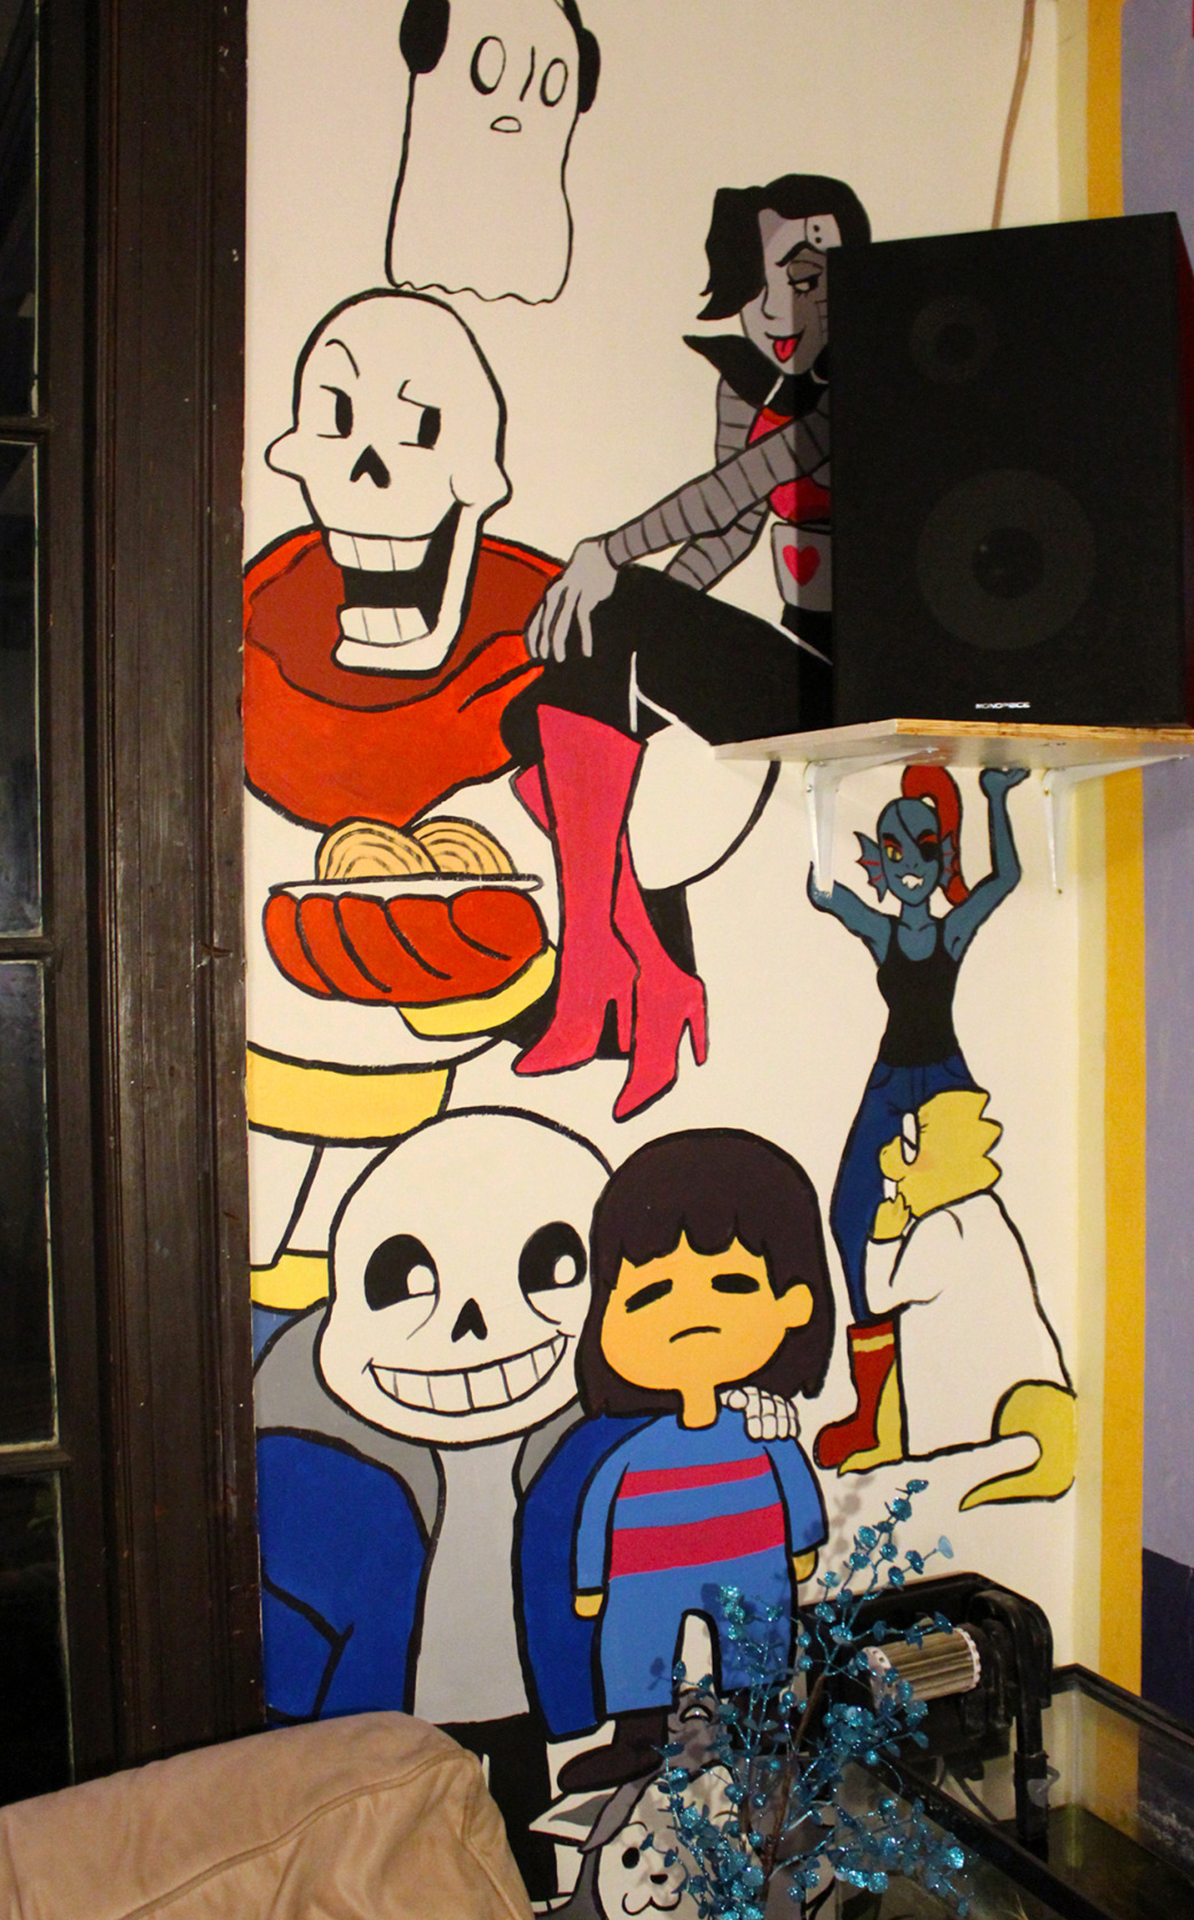 A mural of several Undertale characters: Napstablook, Mettaton, Papyrus, Sans, Frisk, Undyne, and Alphys. The way it is constructed in the room it looks like Undyne is holding up a shelf that Mettaton is sitting on.